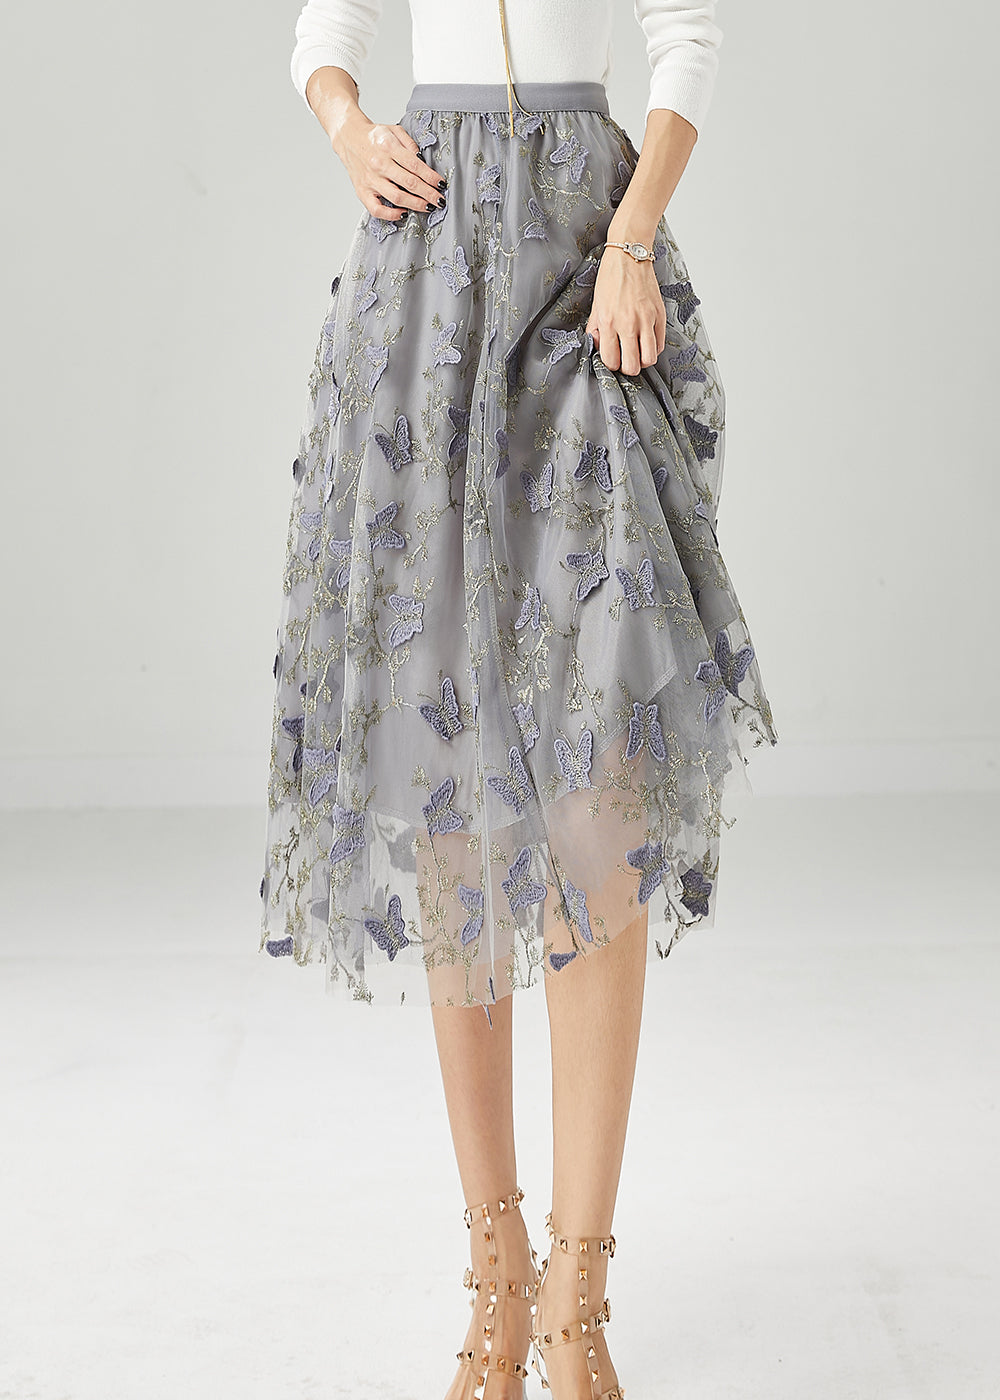 Simple Grey Embroideried Butterfly Tulle Skirt Fall